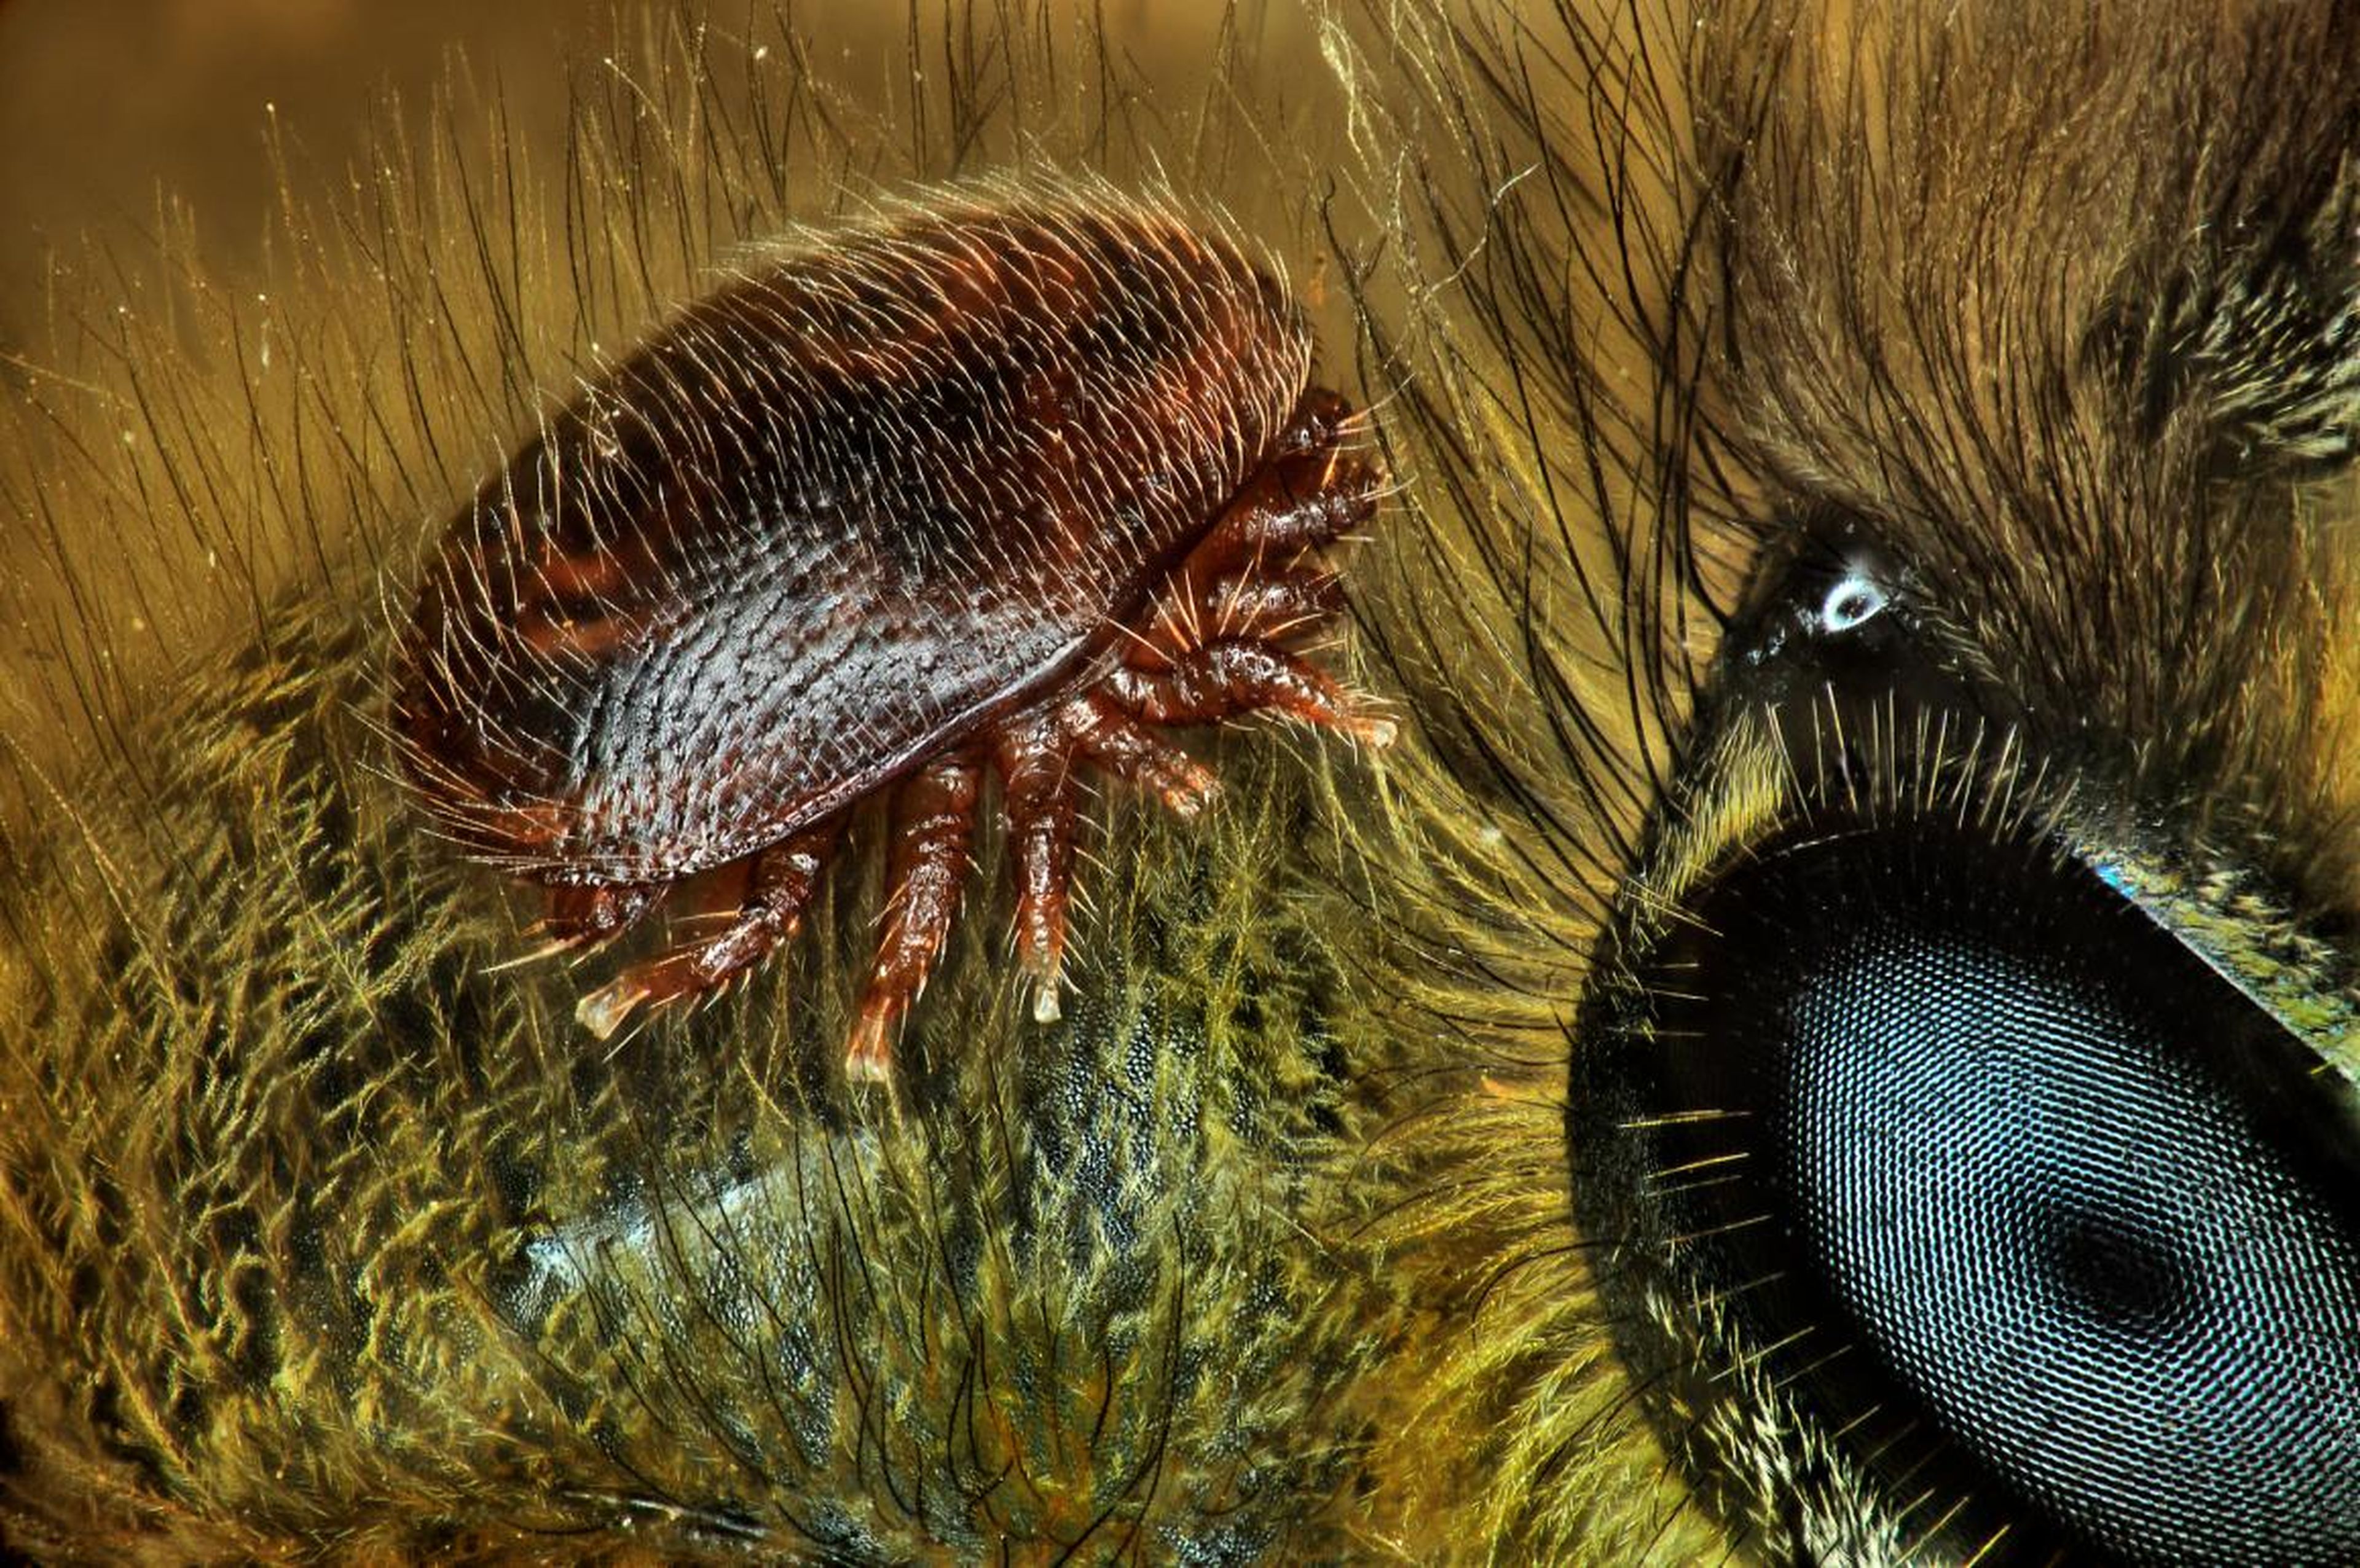 No. 15: A mite on the back of a honeybee.